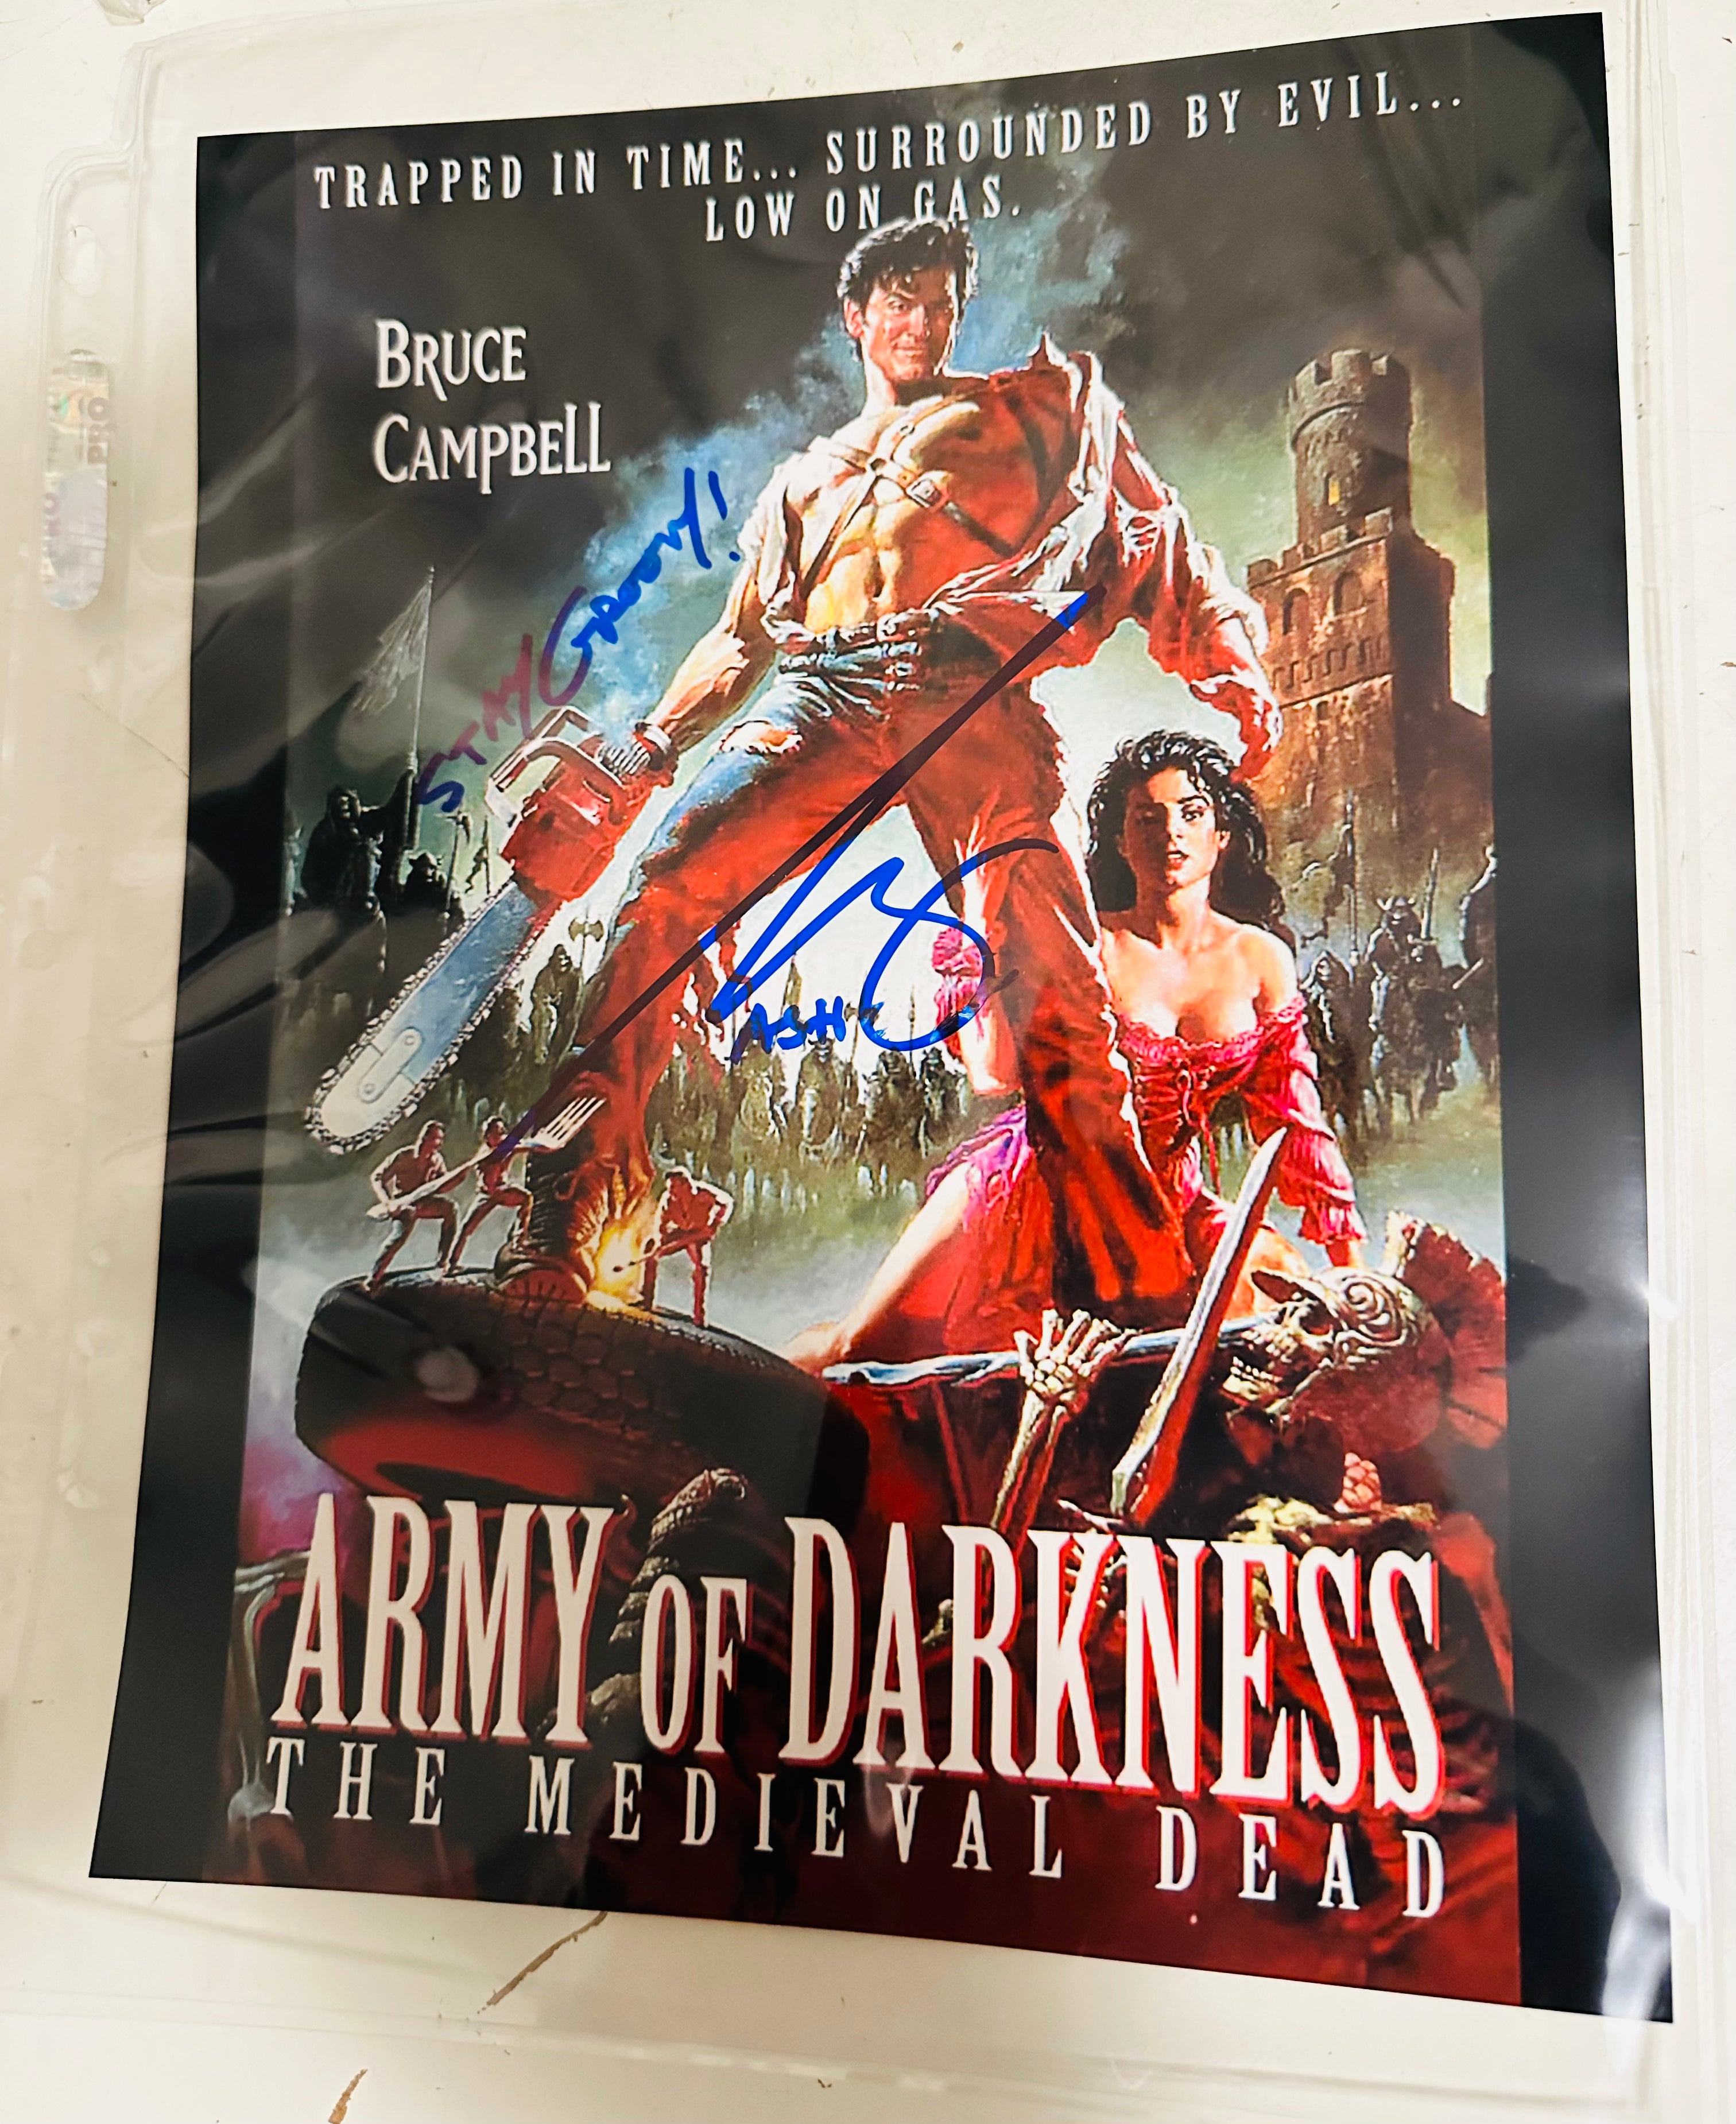 Army of Darkness Bruce Campbell autograph 8x10 photo certified by Fanexpo